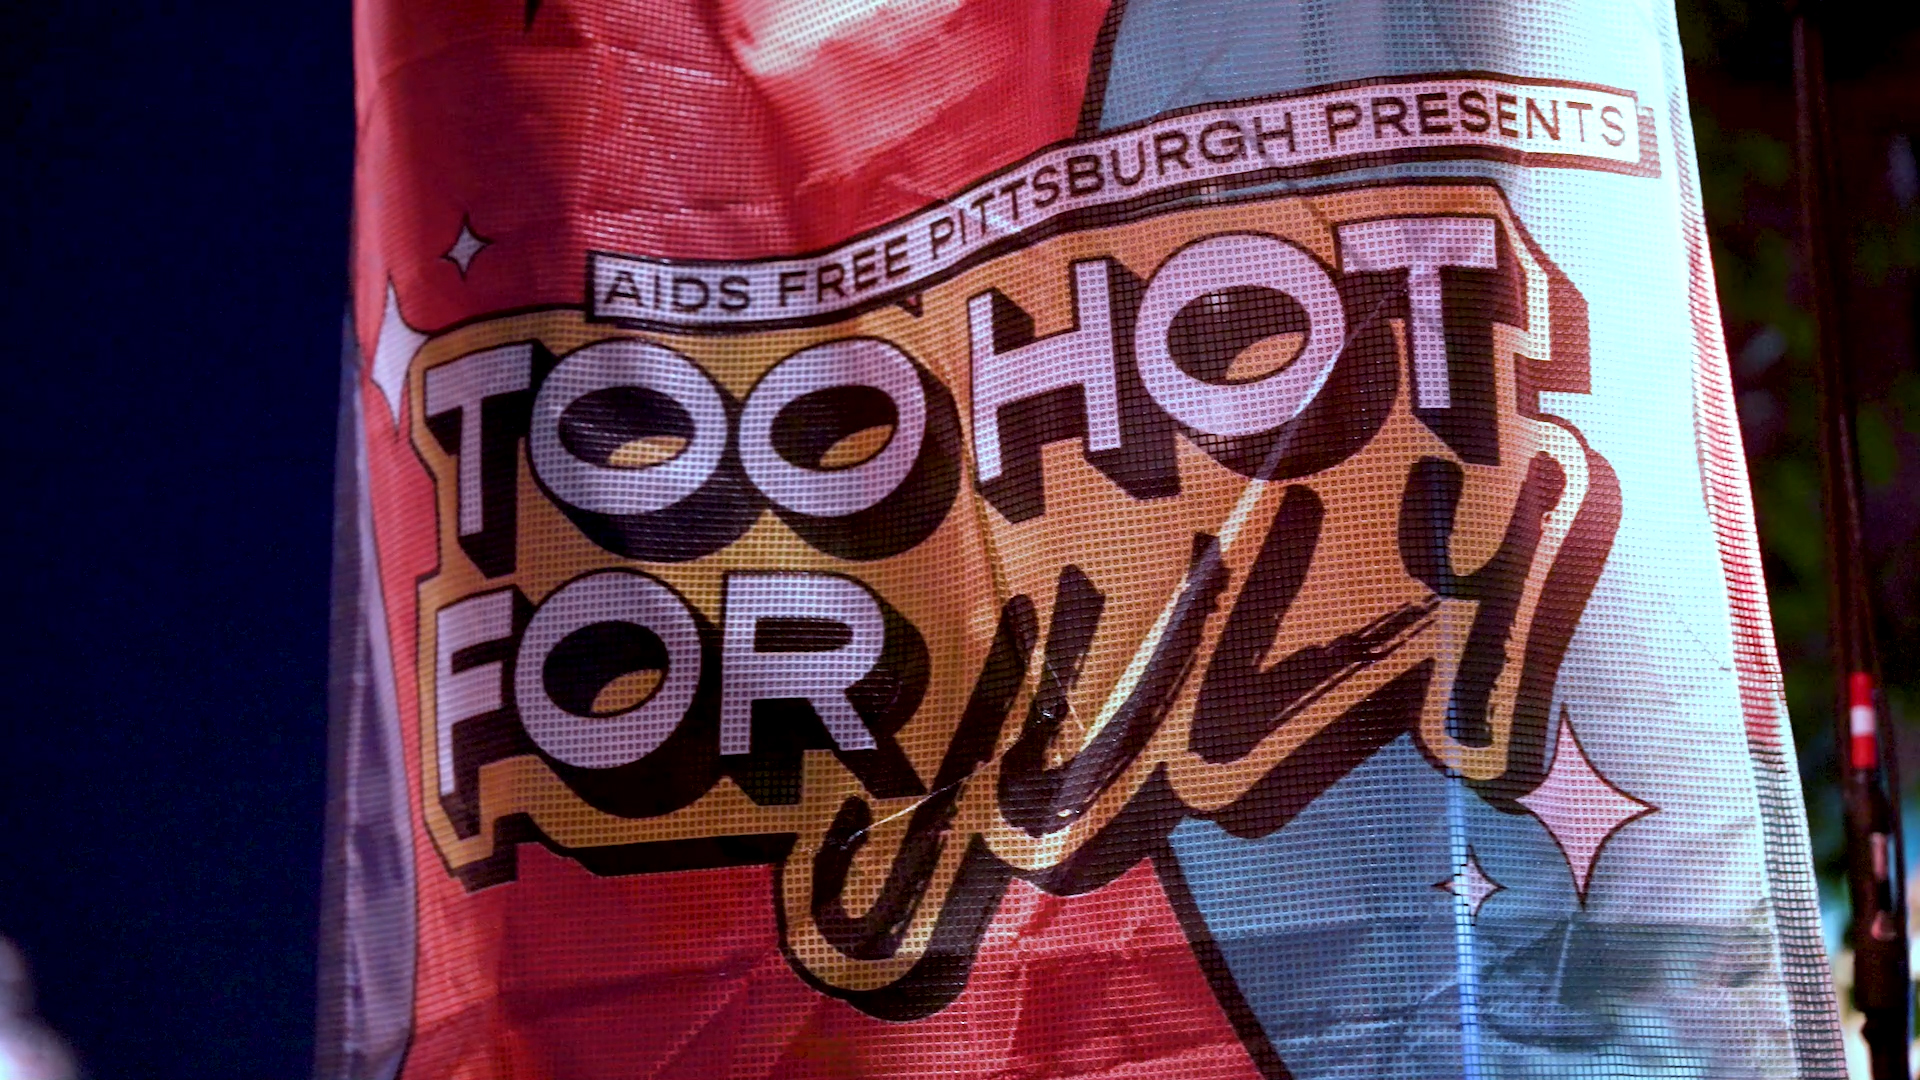 Aids free Pittsburgh presents Too Hot for July